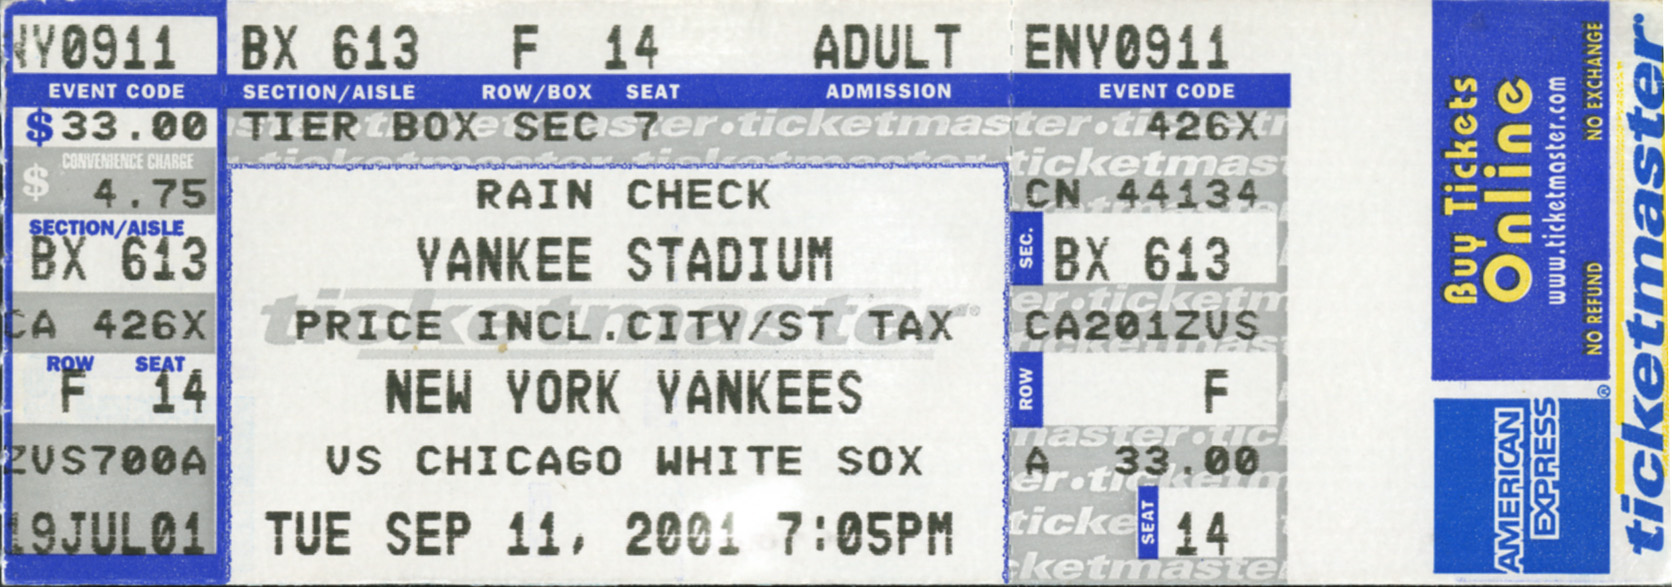 A rain-check Yankees ticket from September 10, 2001, is displayed. The ticket notes that the game will take place on Tuesday, September 11, 2001 at 7:05 p.m.